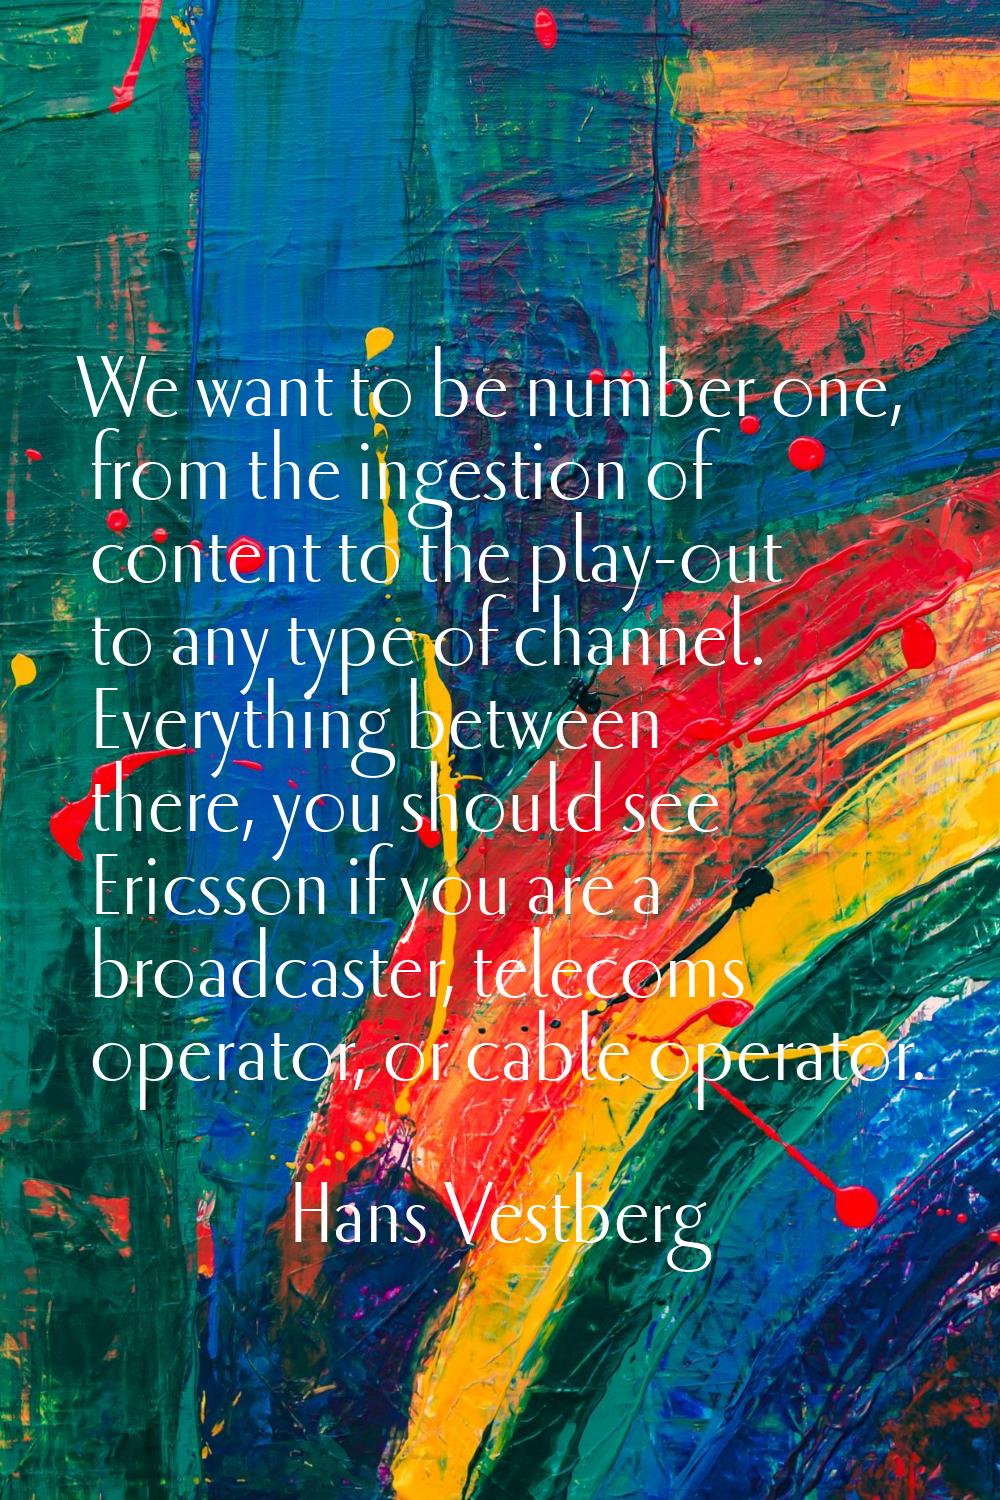 We want to be number one, from the ingestion of content to the play-out to any type of channel. Eve